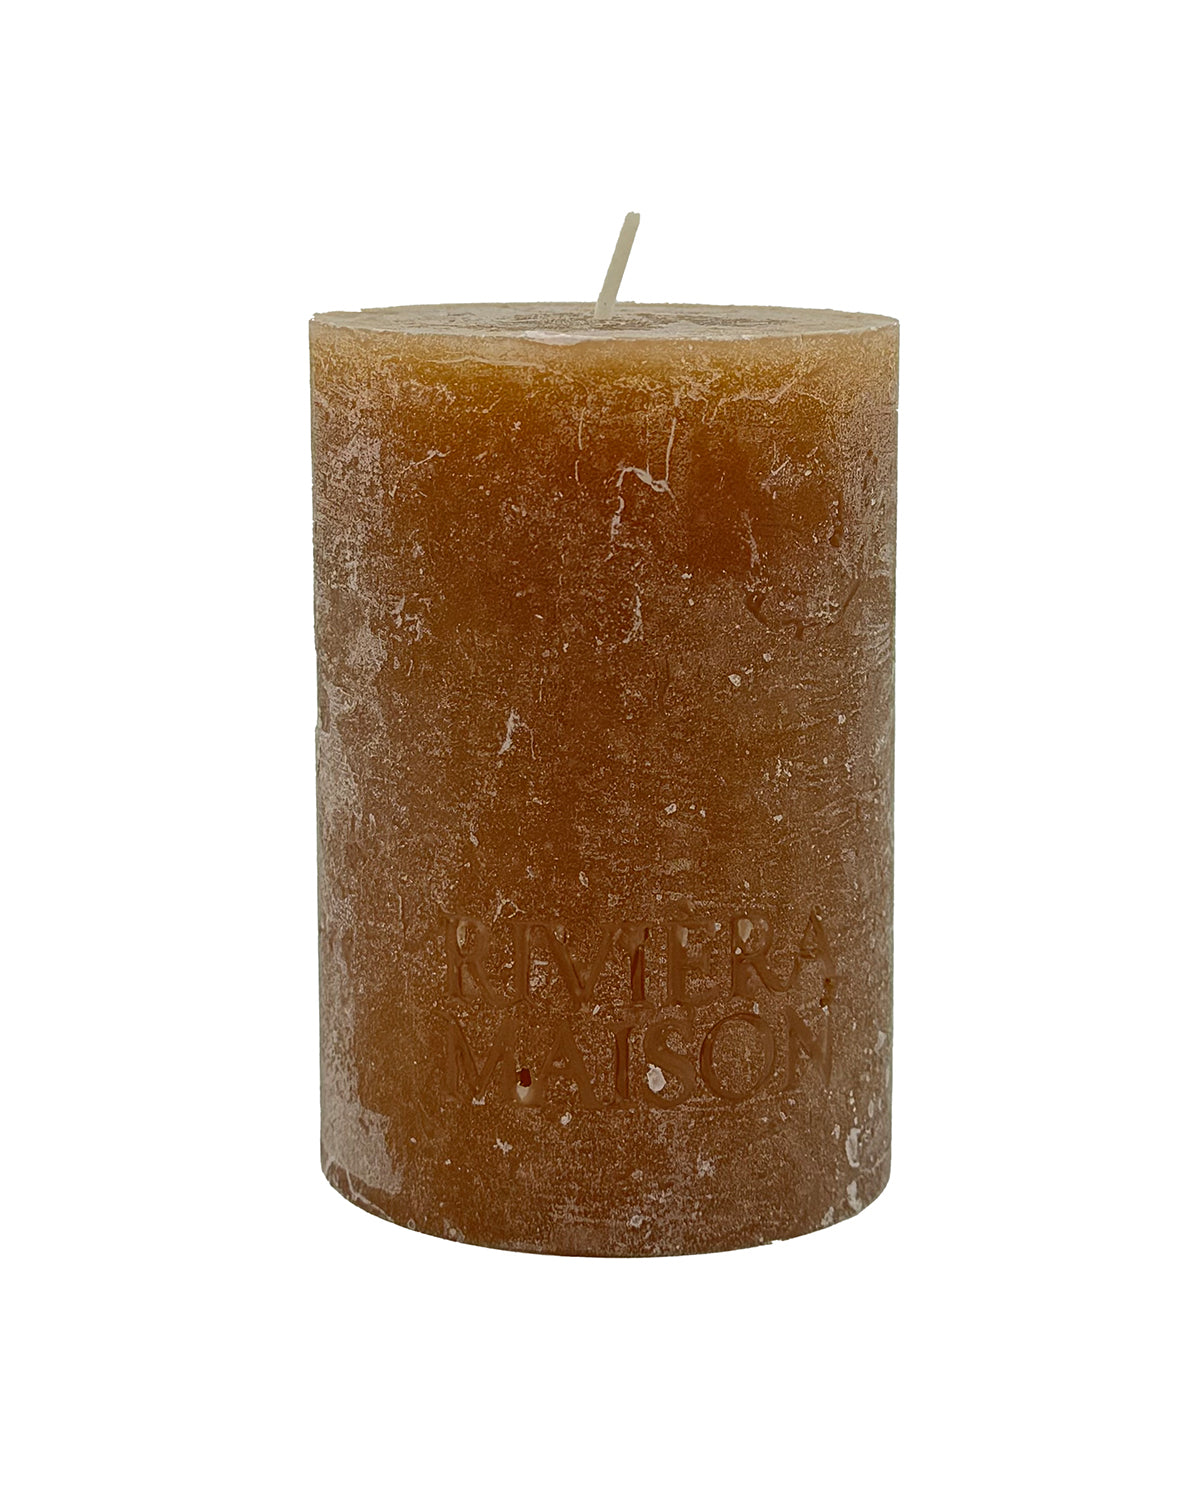 Riviera Maison candle in color brown